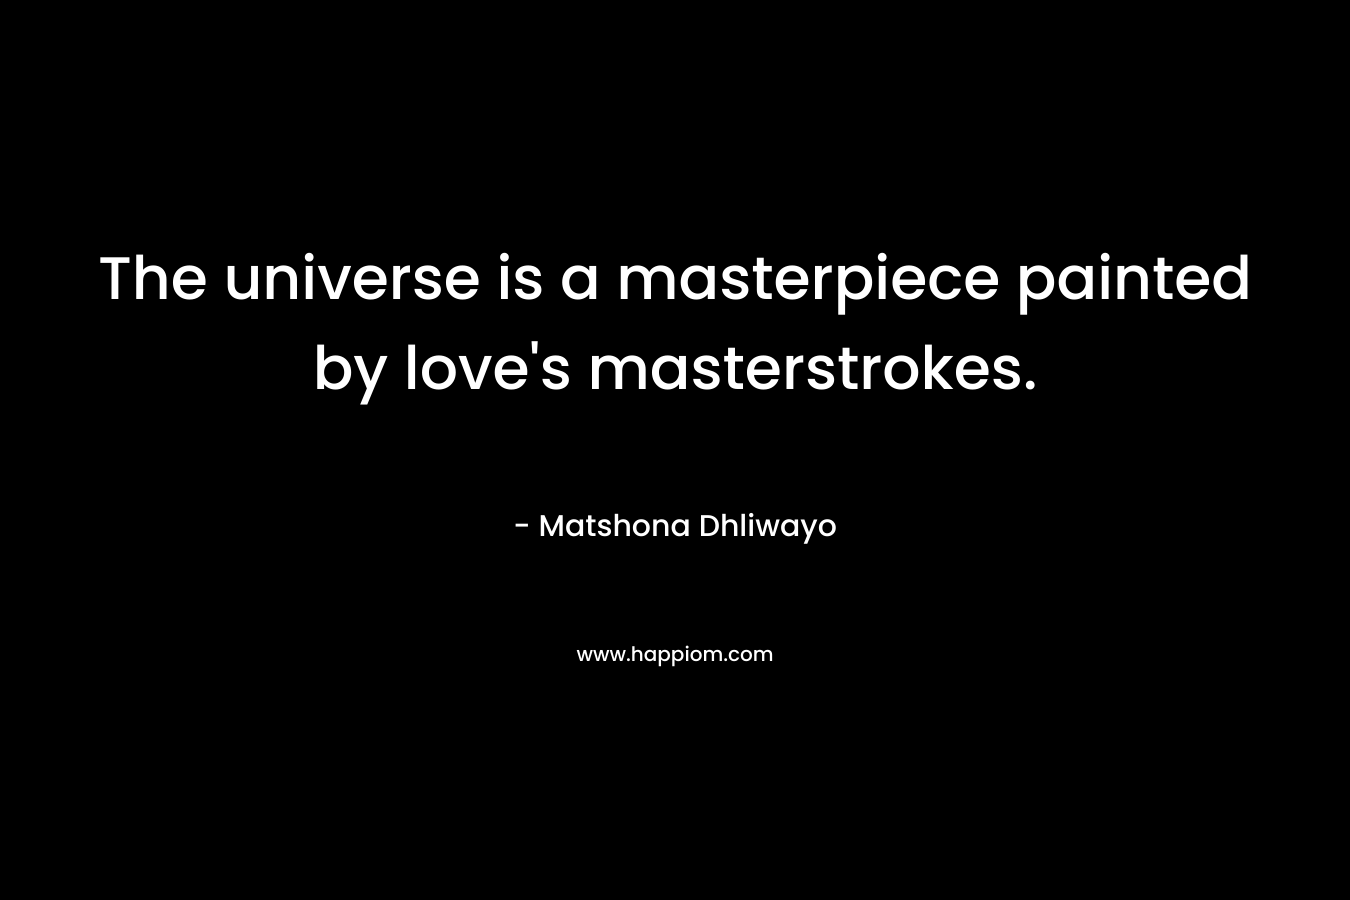 The universe is a masterpiece painted by love's masterstrokes.